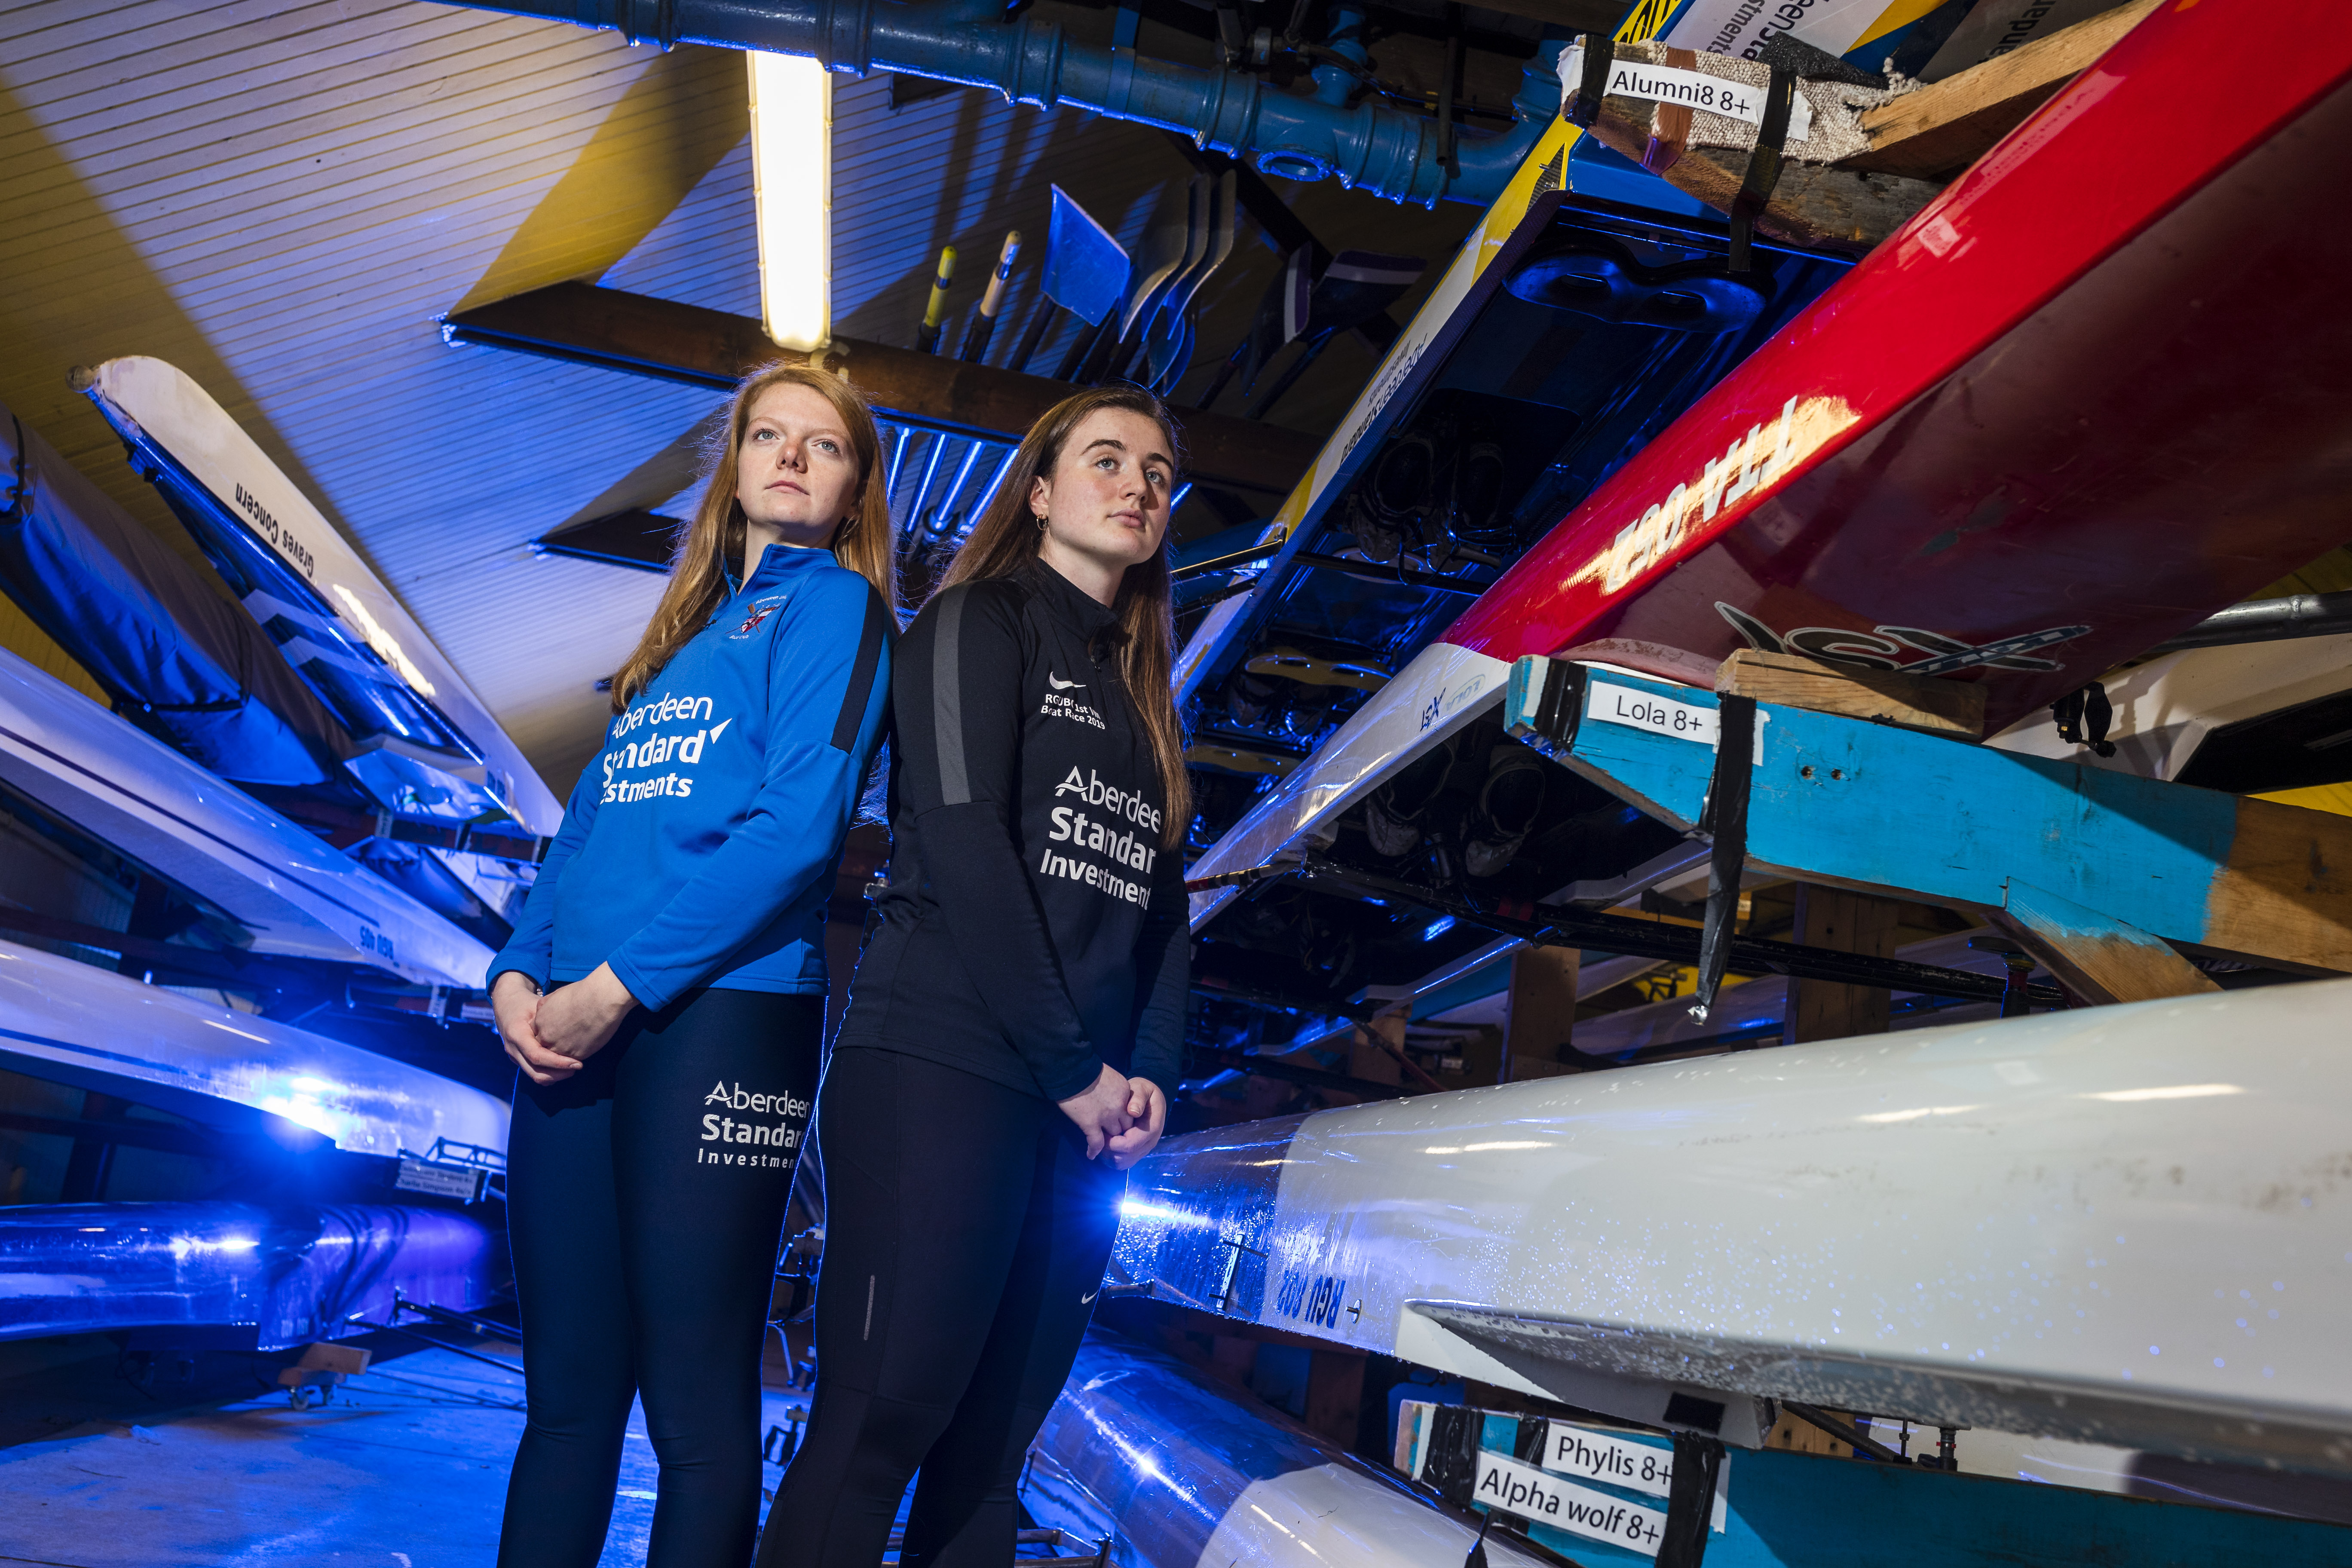 Katie Sugden, left, president of Aberdeen University Boat Club, has accepted the challenge from Lizzie Buchan, president of Robert Gordon University Boat Club.